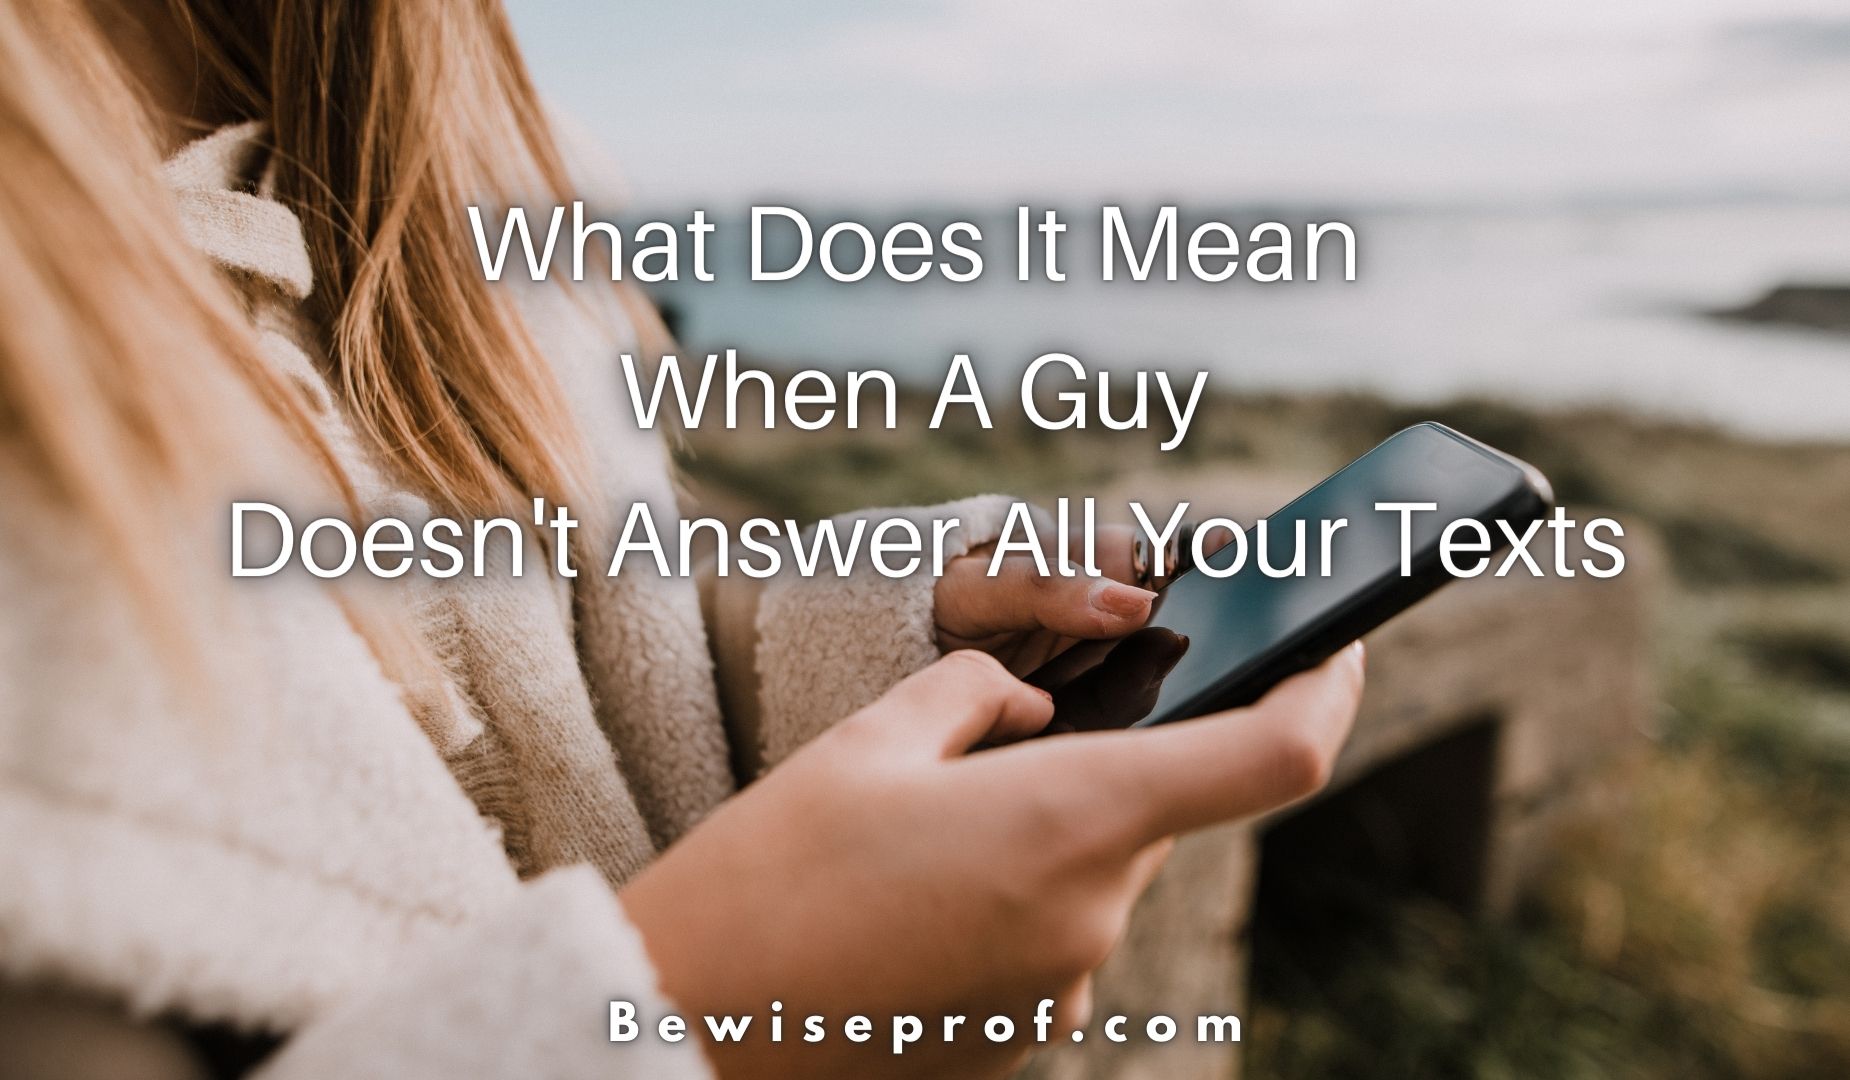 What Does It Mean When A Guy Doesn't Answer All Your Texts